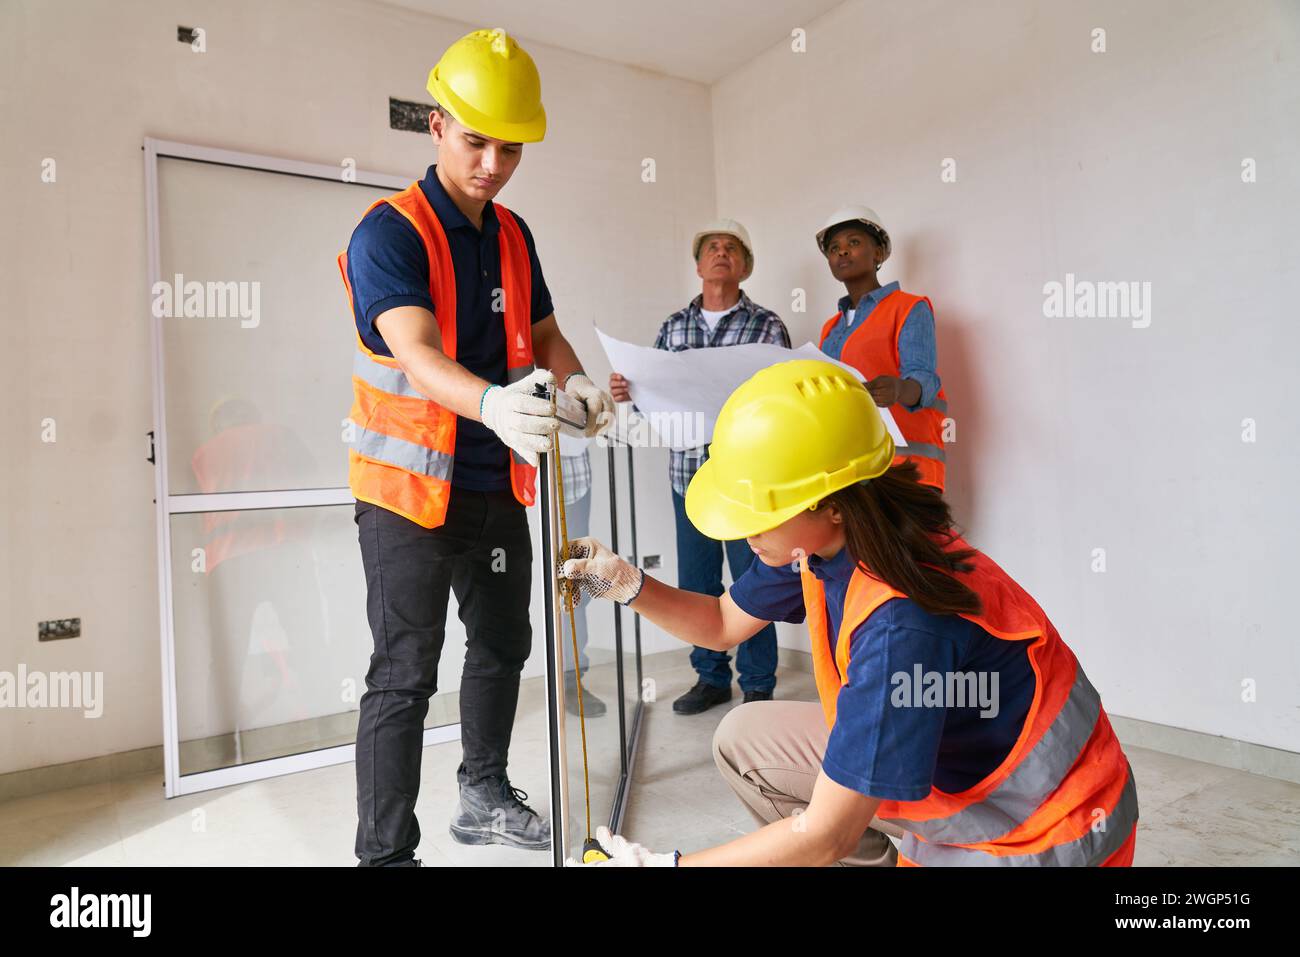 Carpenters examining window frame near coworkers Stock Photo